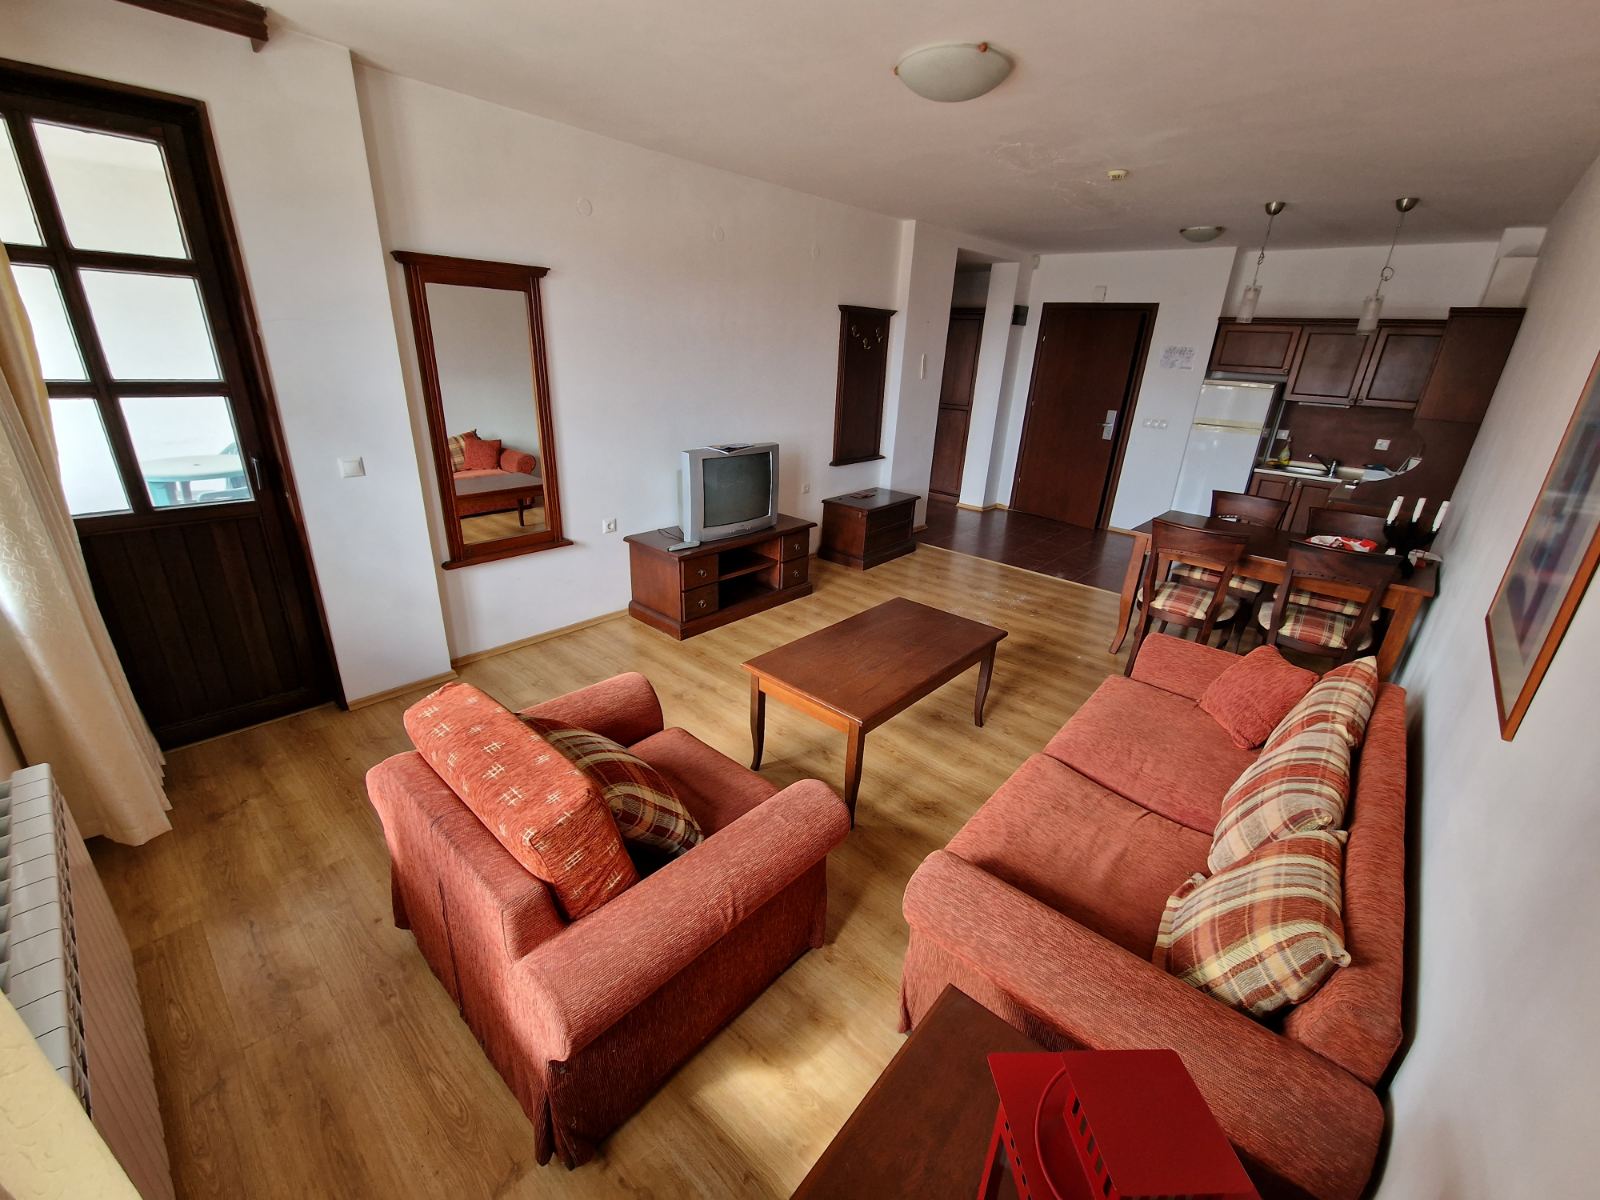 Spacious one bed apartment in Astera Bansko, 200 meters from the Gondola